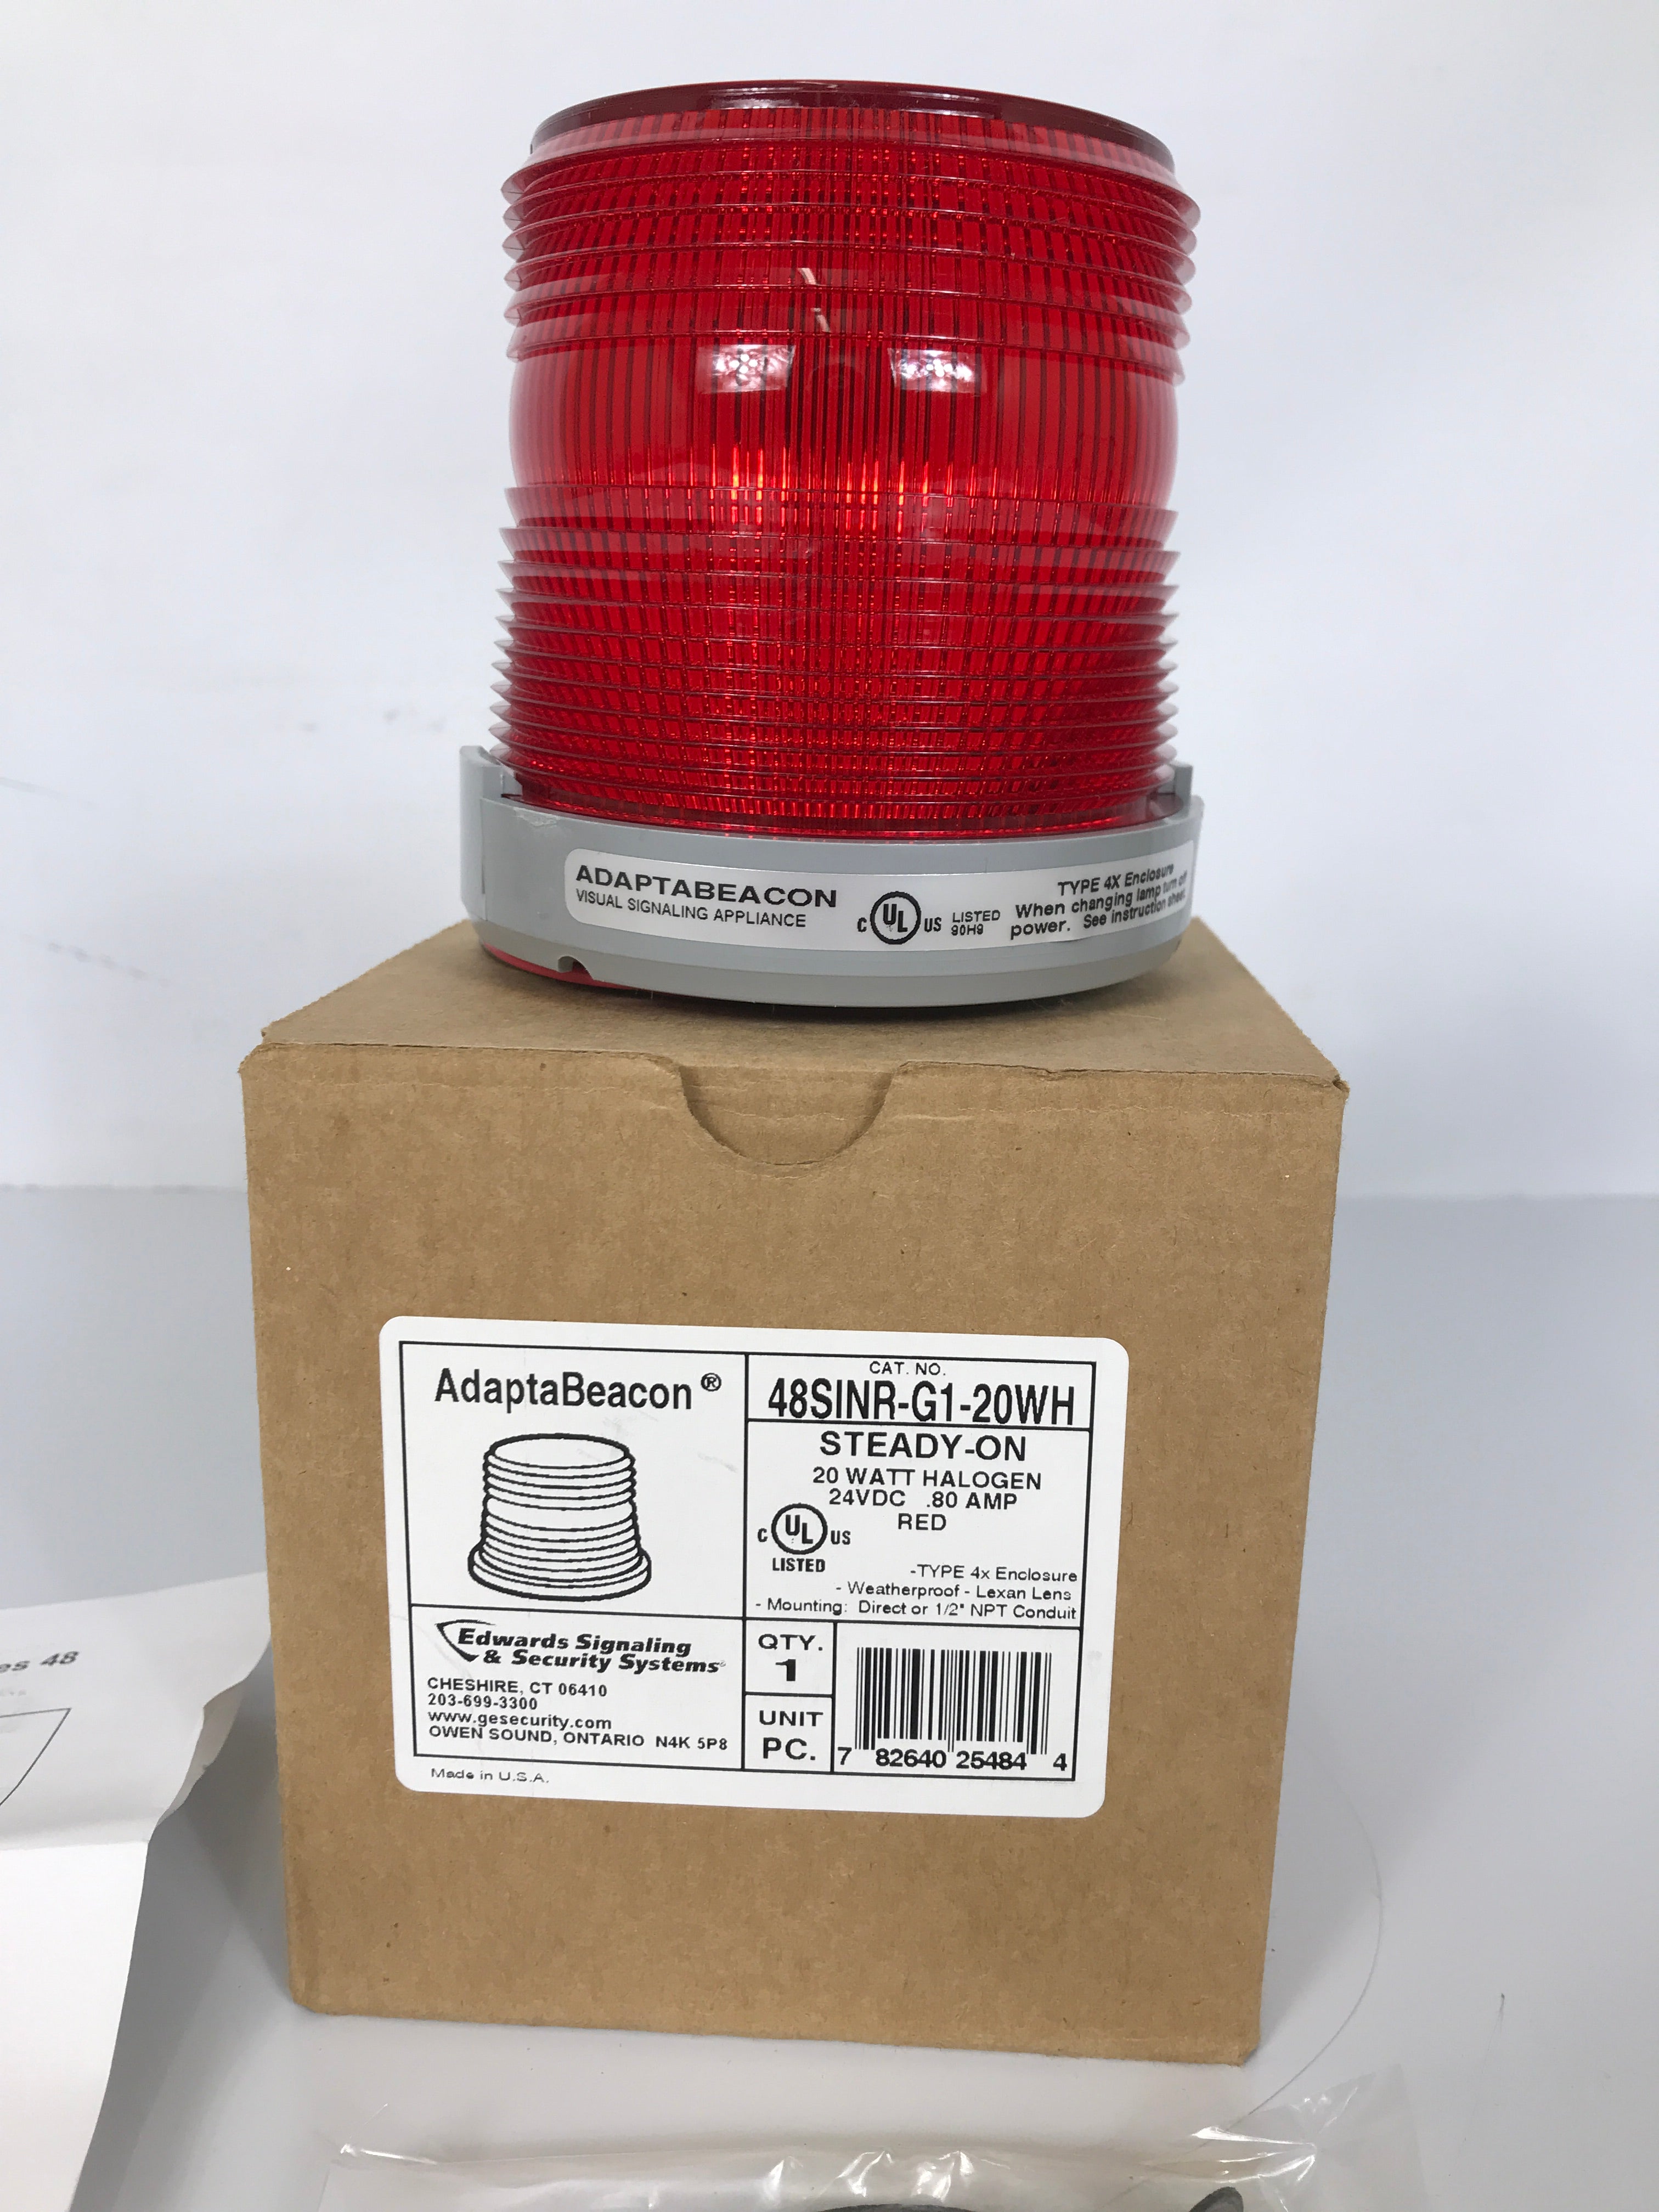 AdaptaBeacon 48SINR-G1-20WH Steady-On Automotive Light *New in Box*